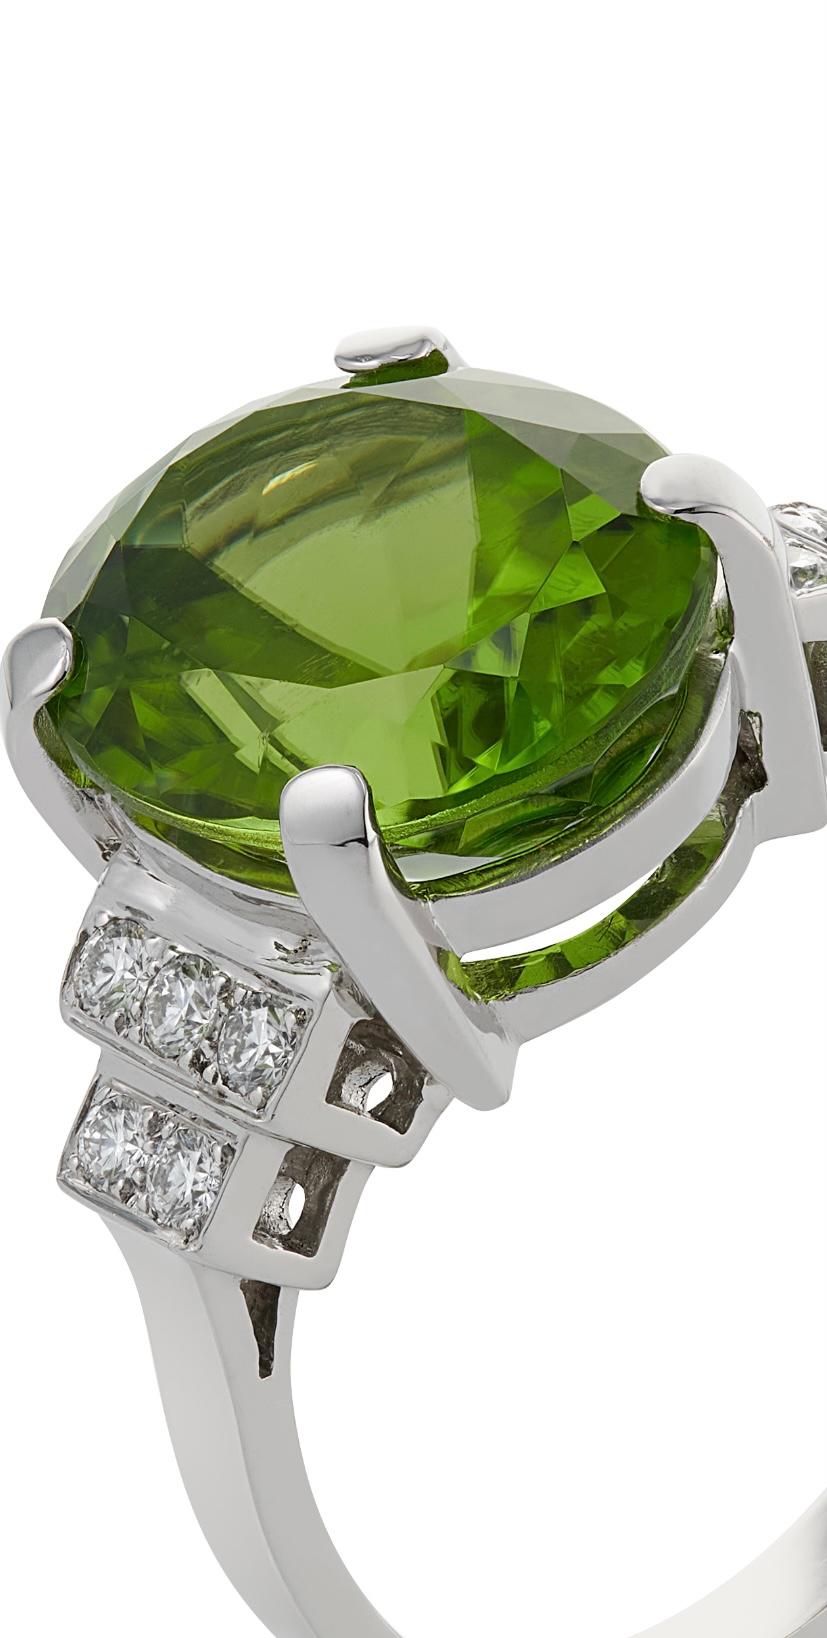 Round Cut 18ct White Gold 7.12 carats Peridot and Diamond Cocktail Ring